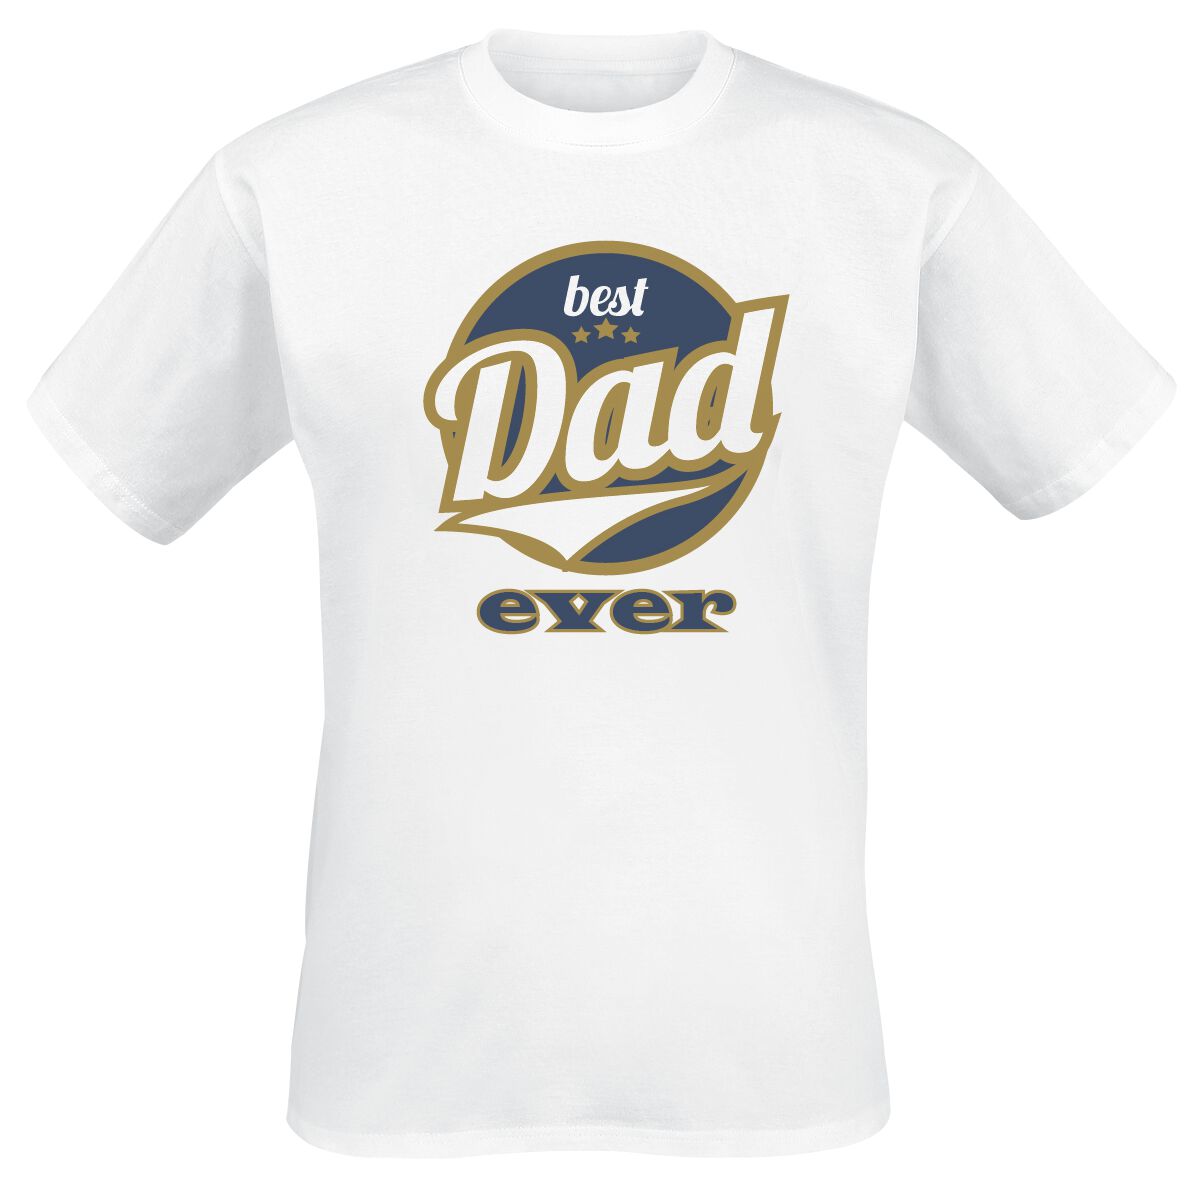 Family & Friends Best Dad Ever T-Shirt white